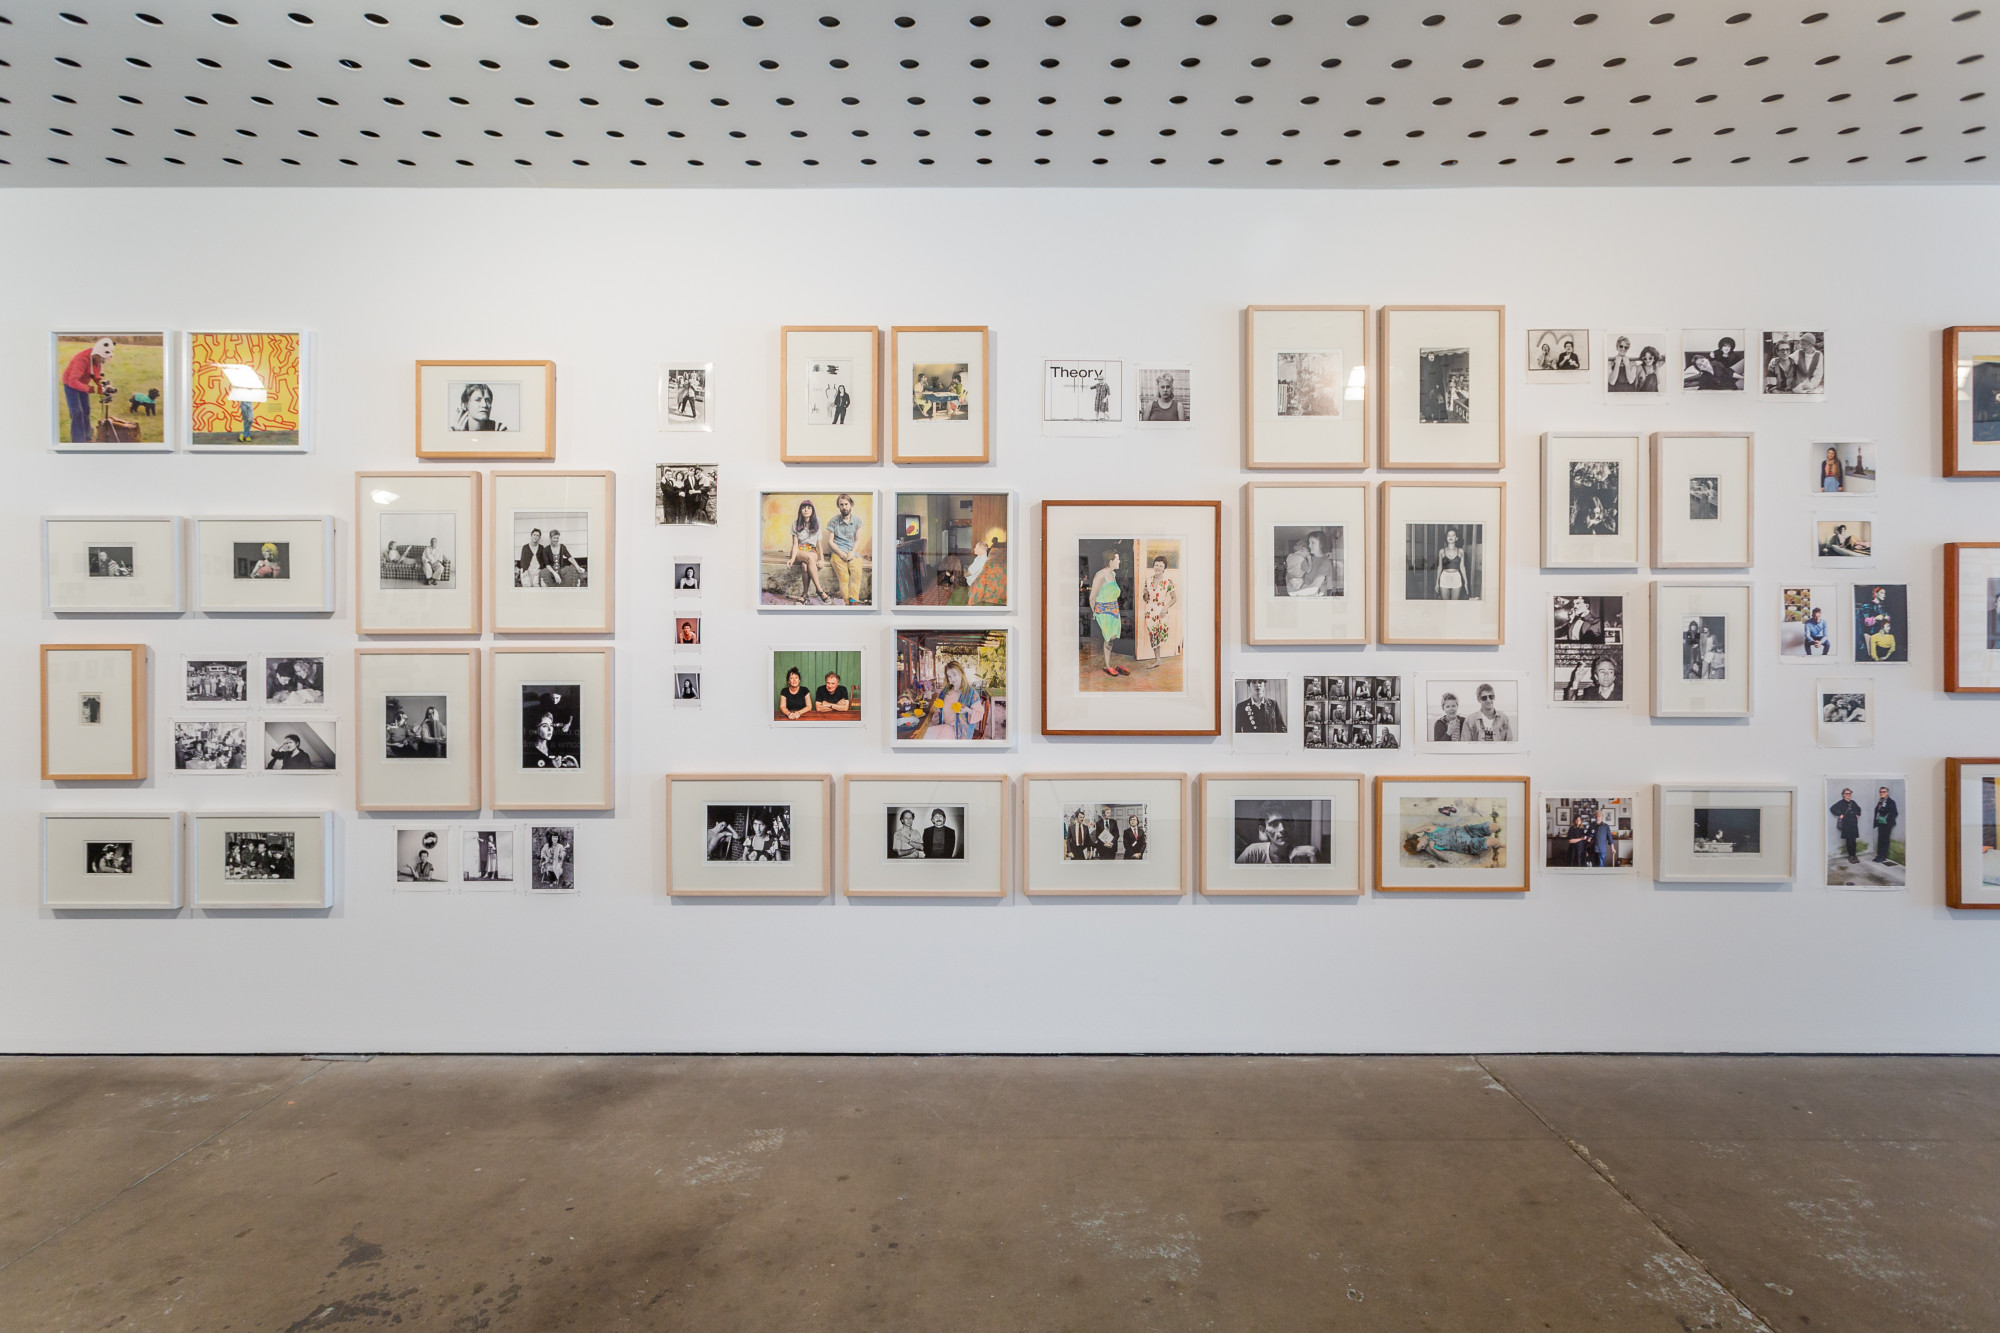 Installation view of Ruth Maddison: It was the best of times, it was the worst of times, 2021, Centre for Contemporary Photography. Photo: J Forsyth.